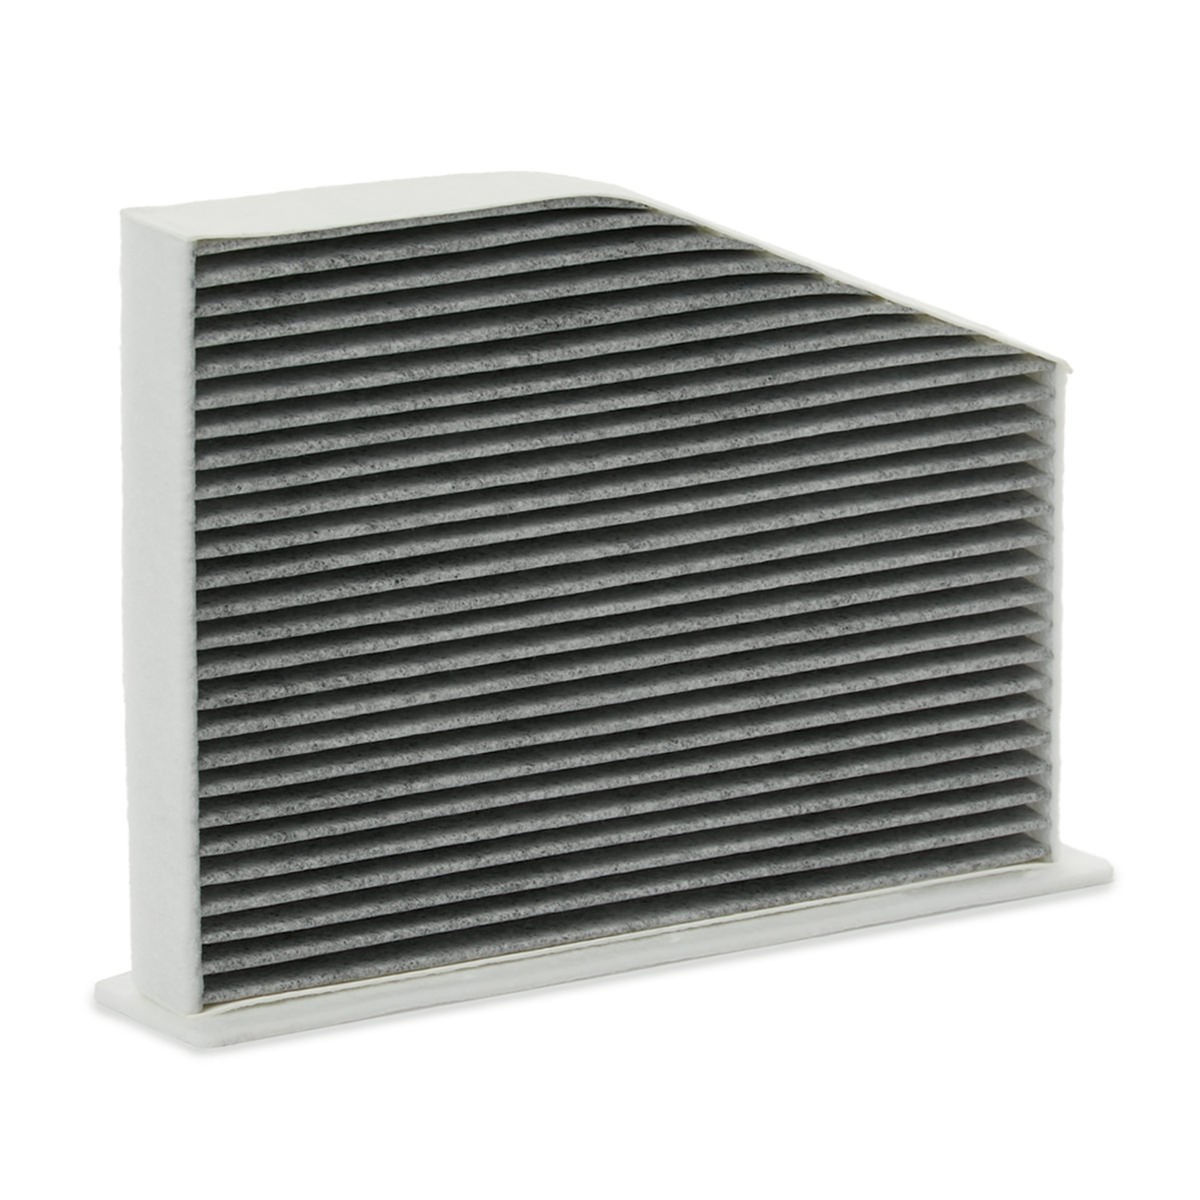 HENGST FILTER E998LC-R Pollen filter Activated Carbon Filter, 288 mm x 213 mm x 58 mm